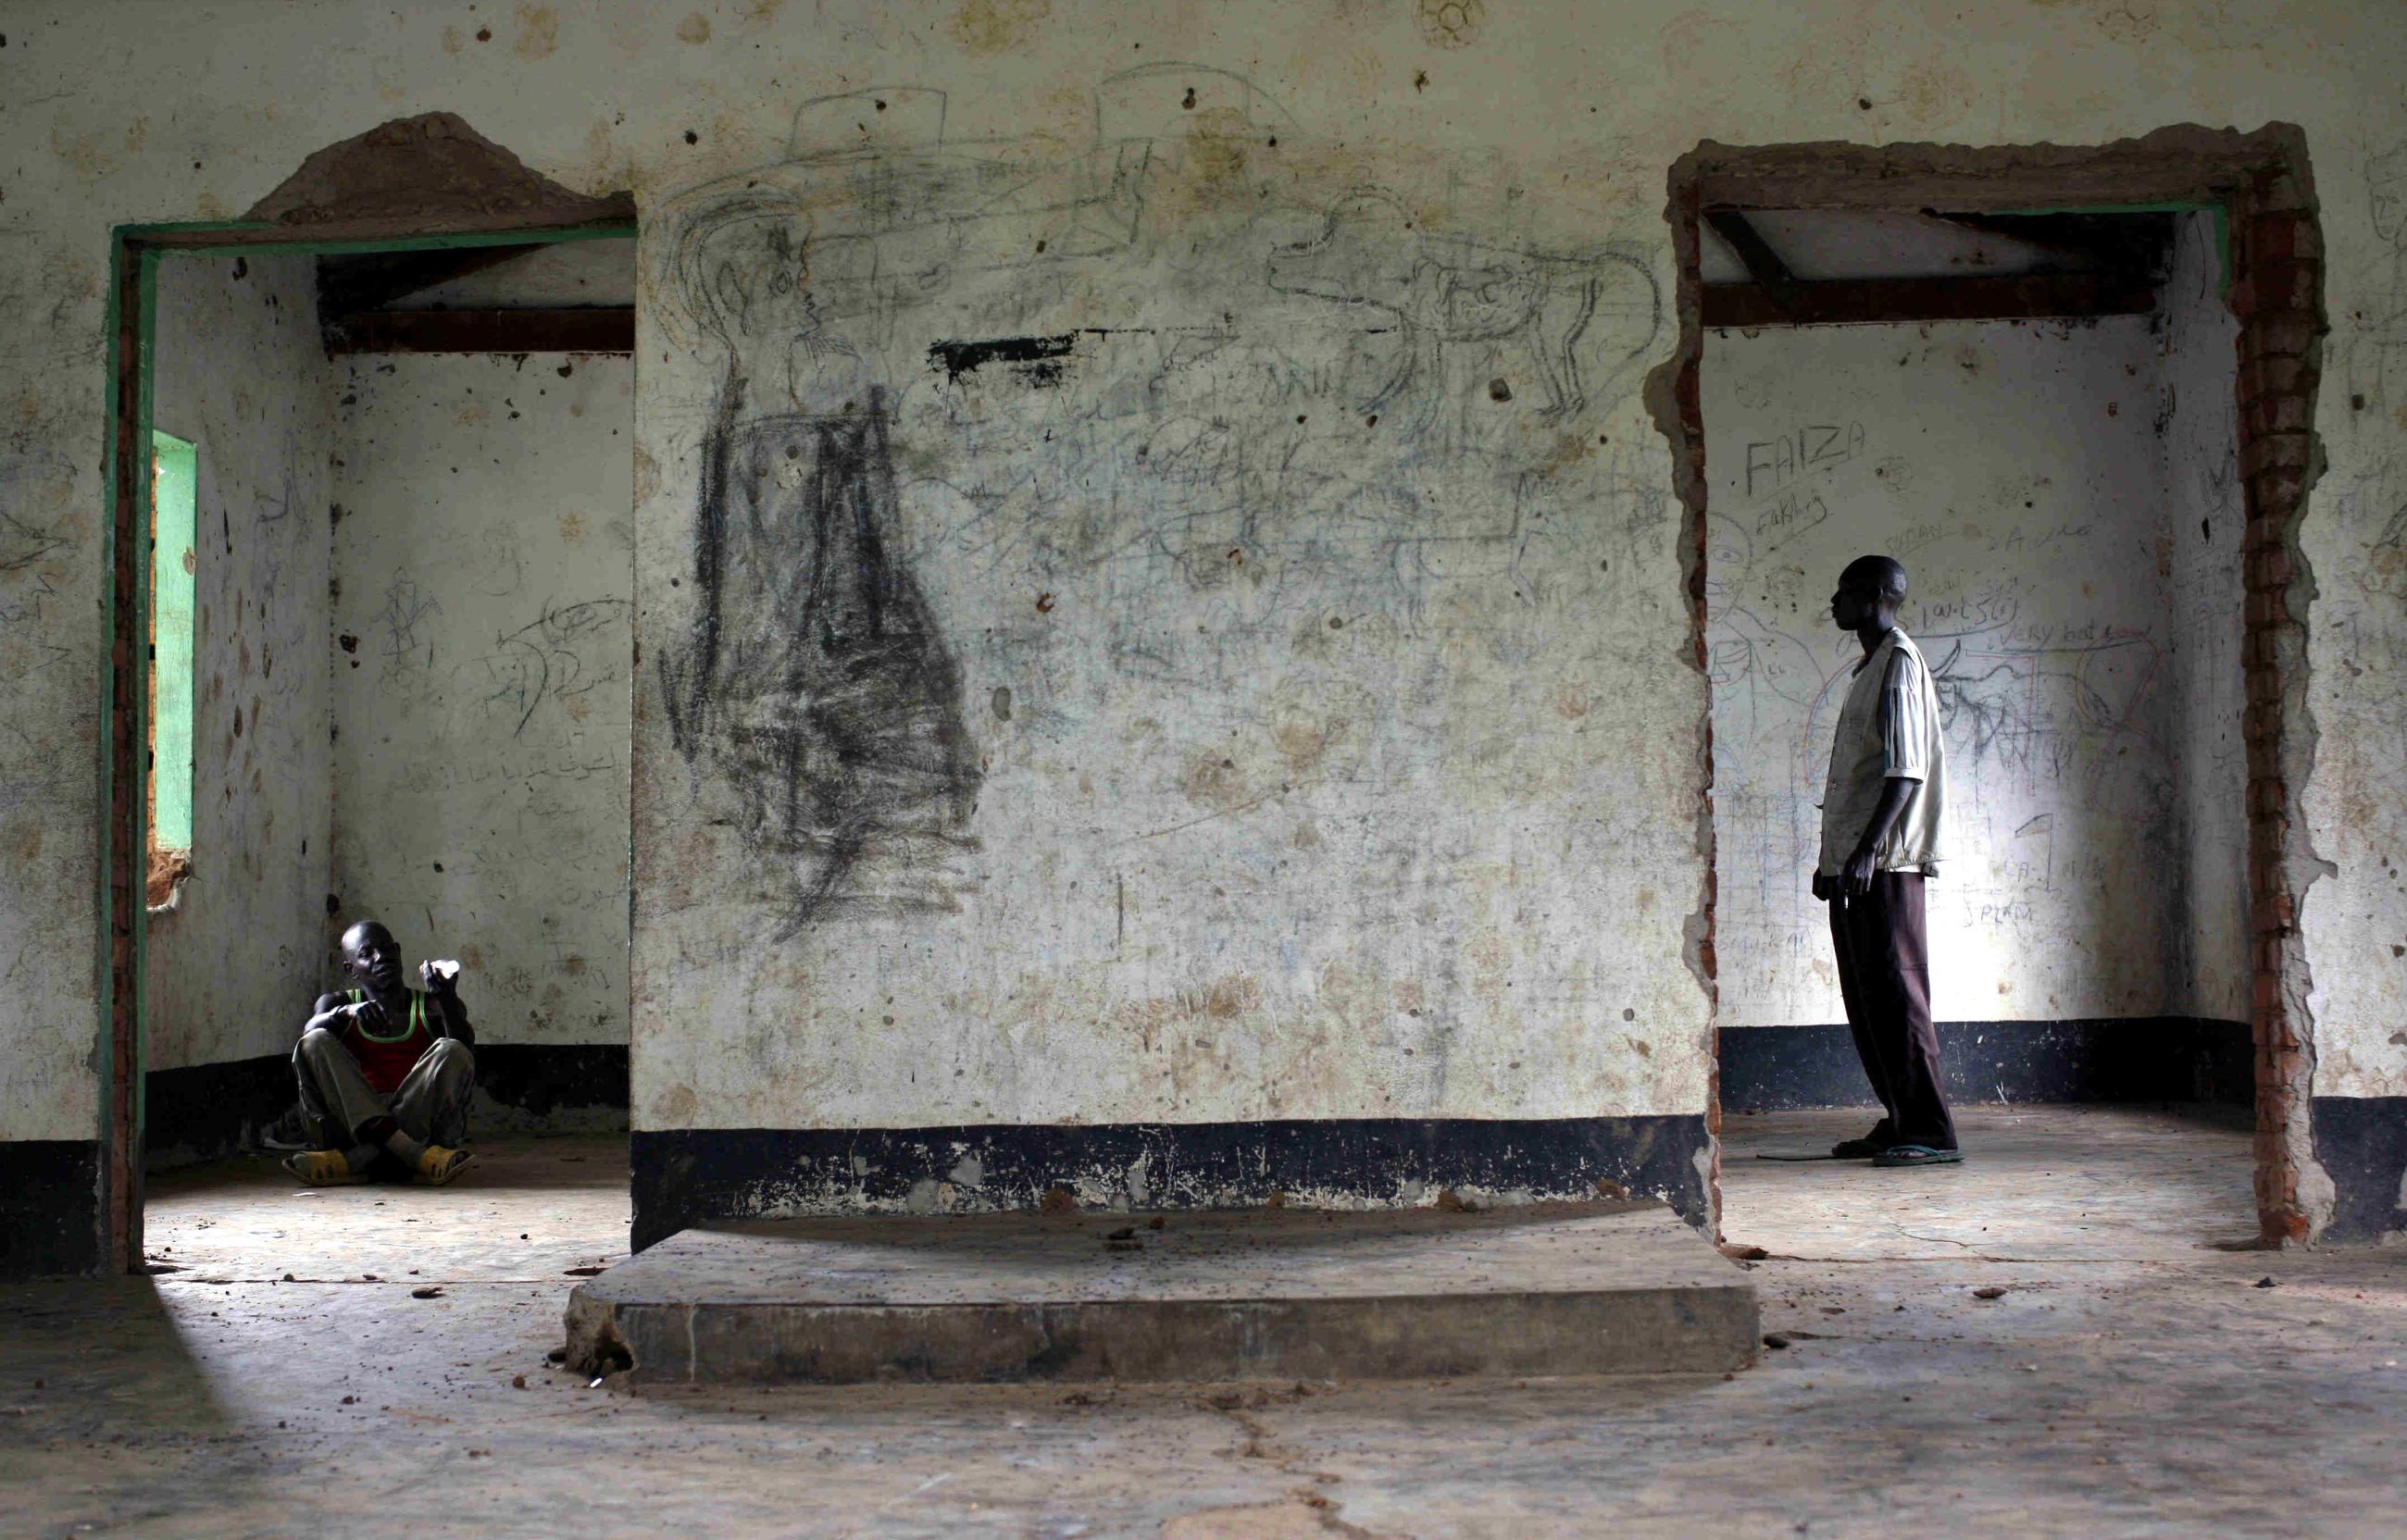 Apollo Longa-Kenyi (R), a leprosy counselling and care worker, counsels a patient Saviour Gabu in an abandoned village building in Mogiri, southern Sudan July 7, 2007.